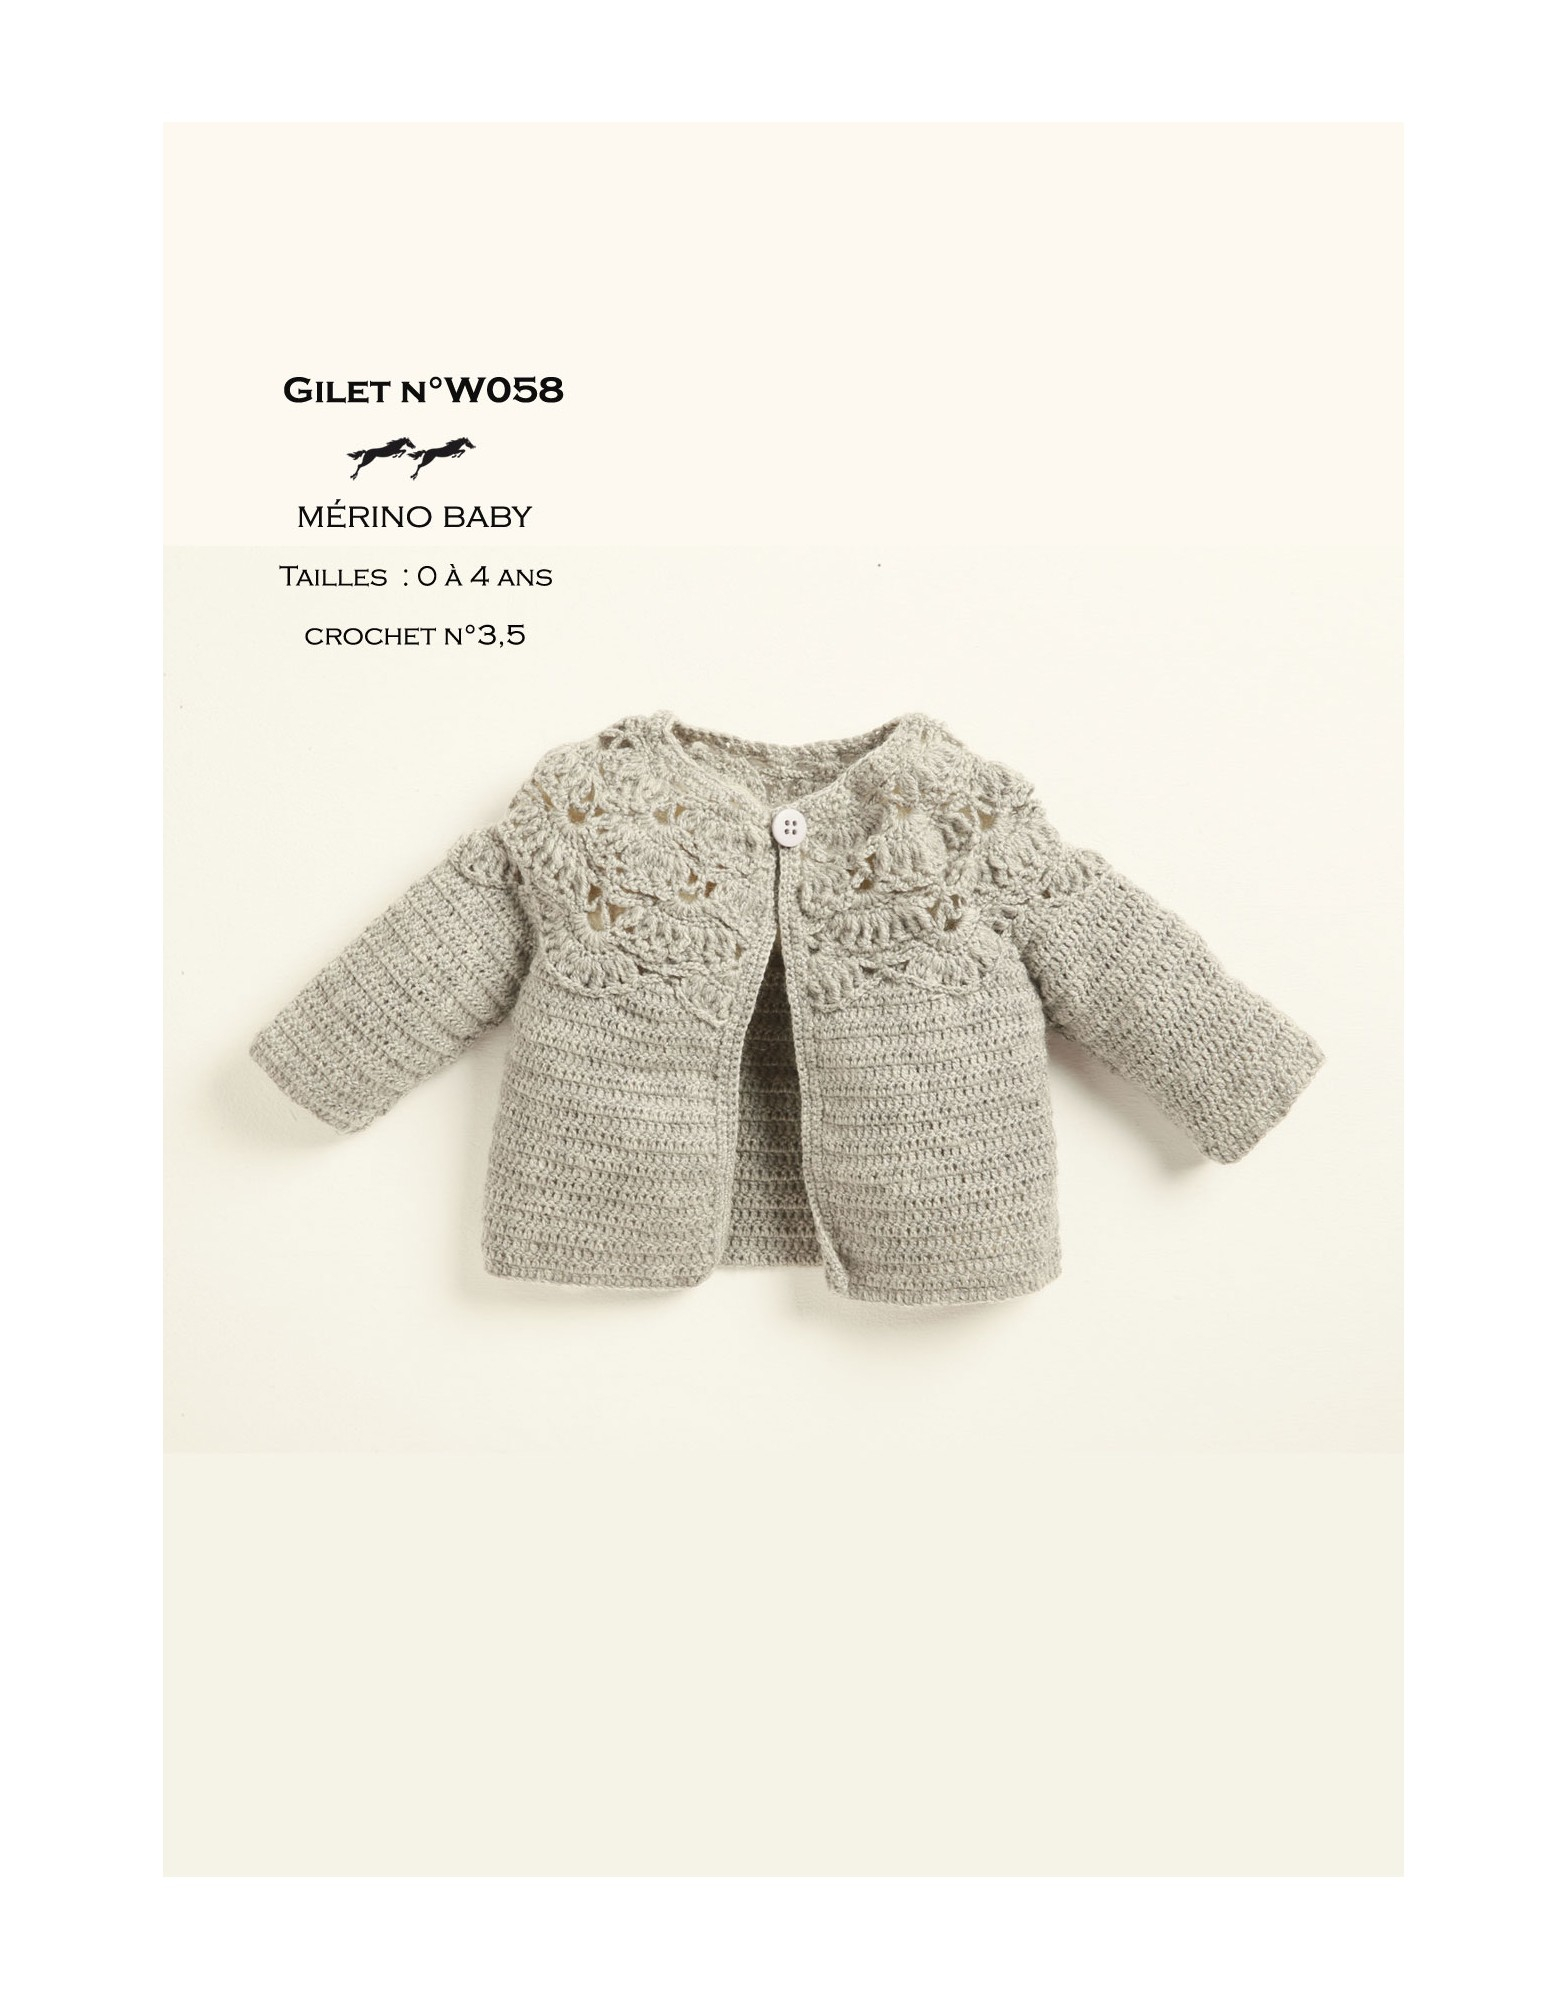 Free Knitting Patterns For Childrens Jackets Ba Jacket Pattern W058 Free Knitting Pattern